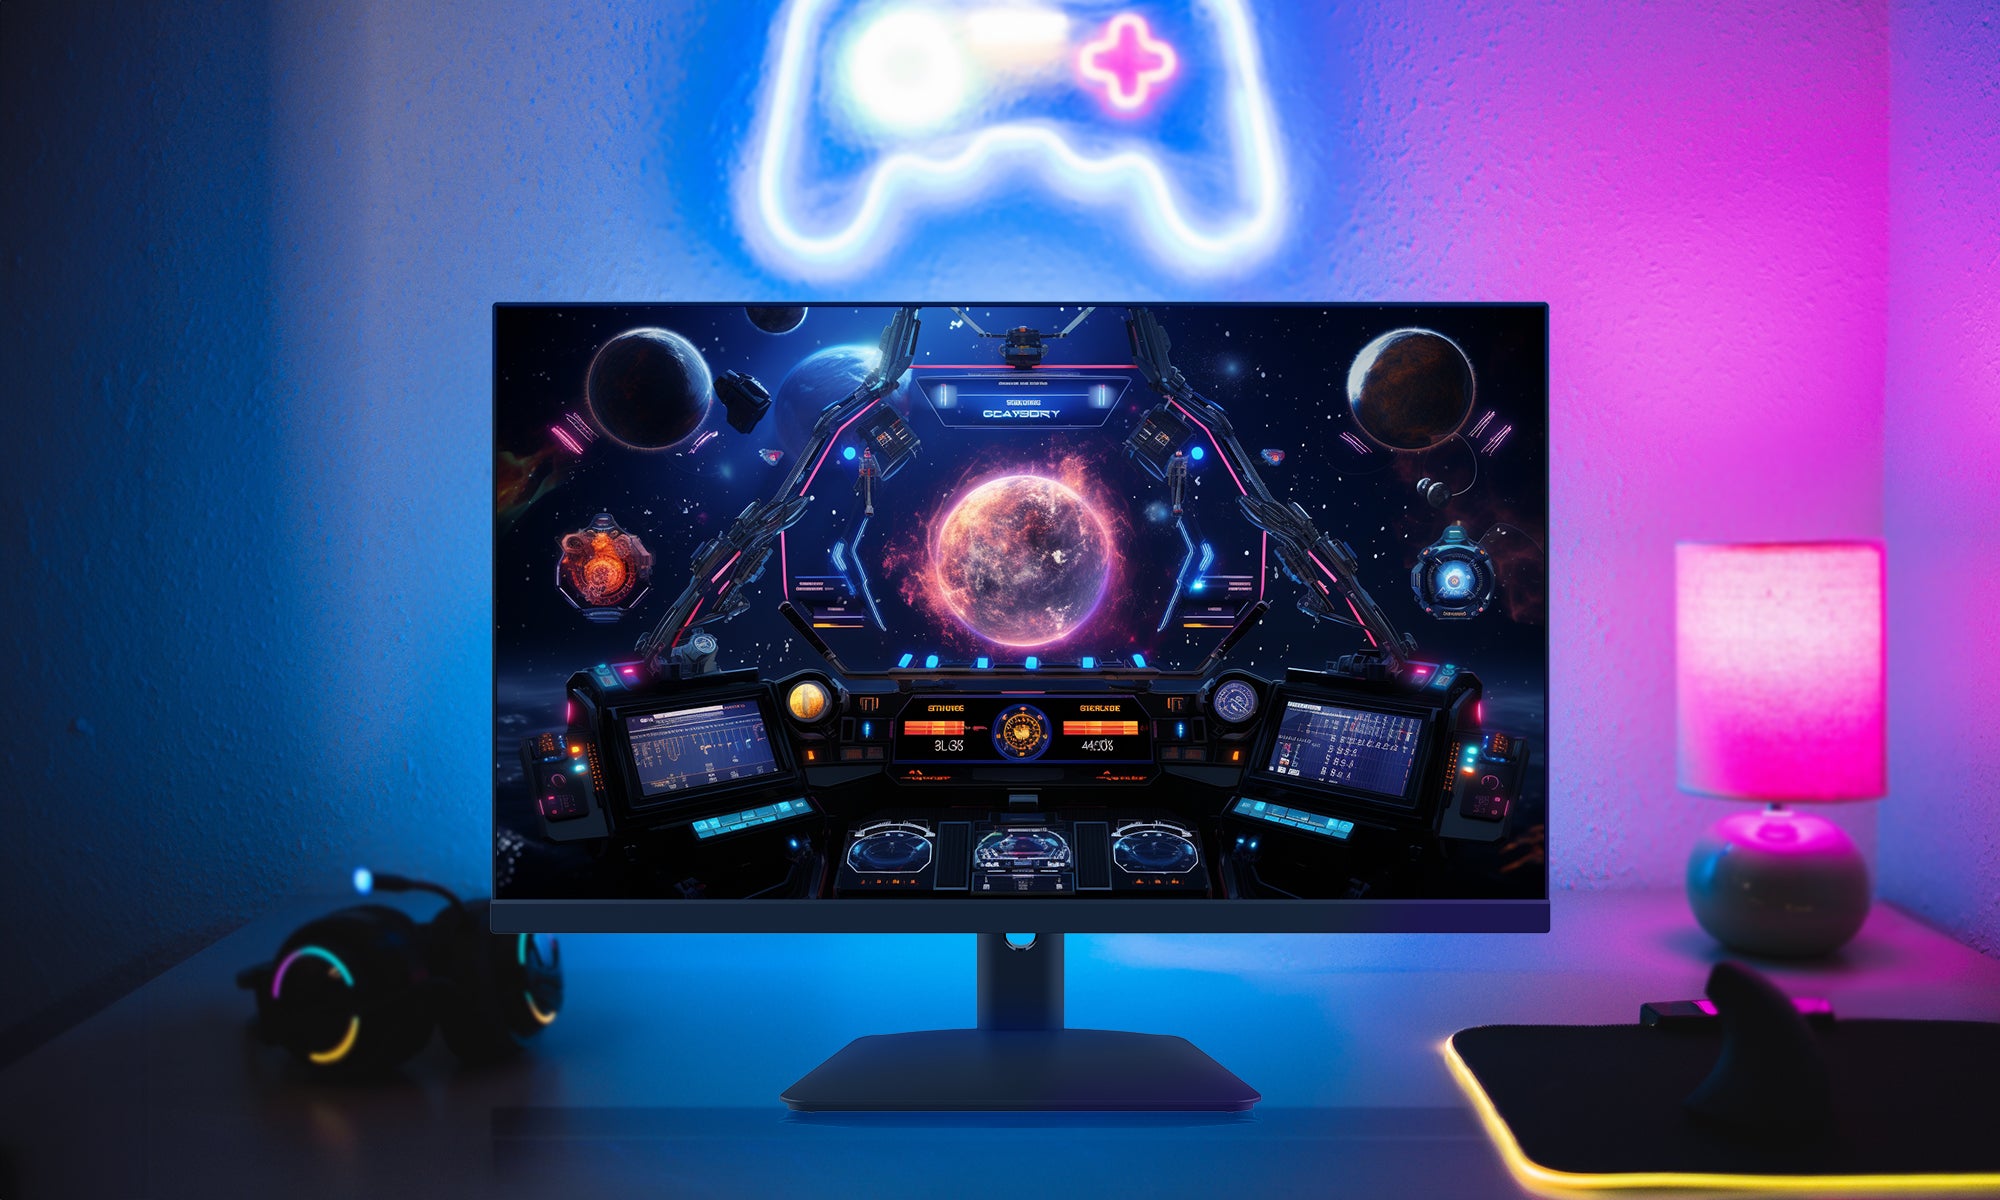 A 24-inch IPS Minifire X5G Gaming Monitor on the desk displays the gaming screen